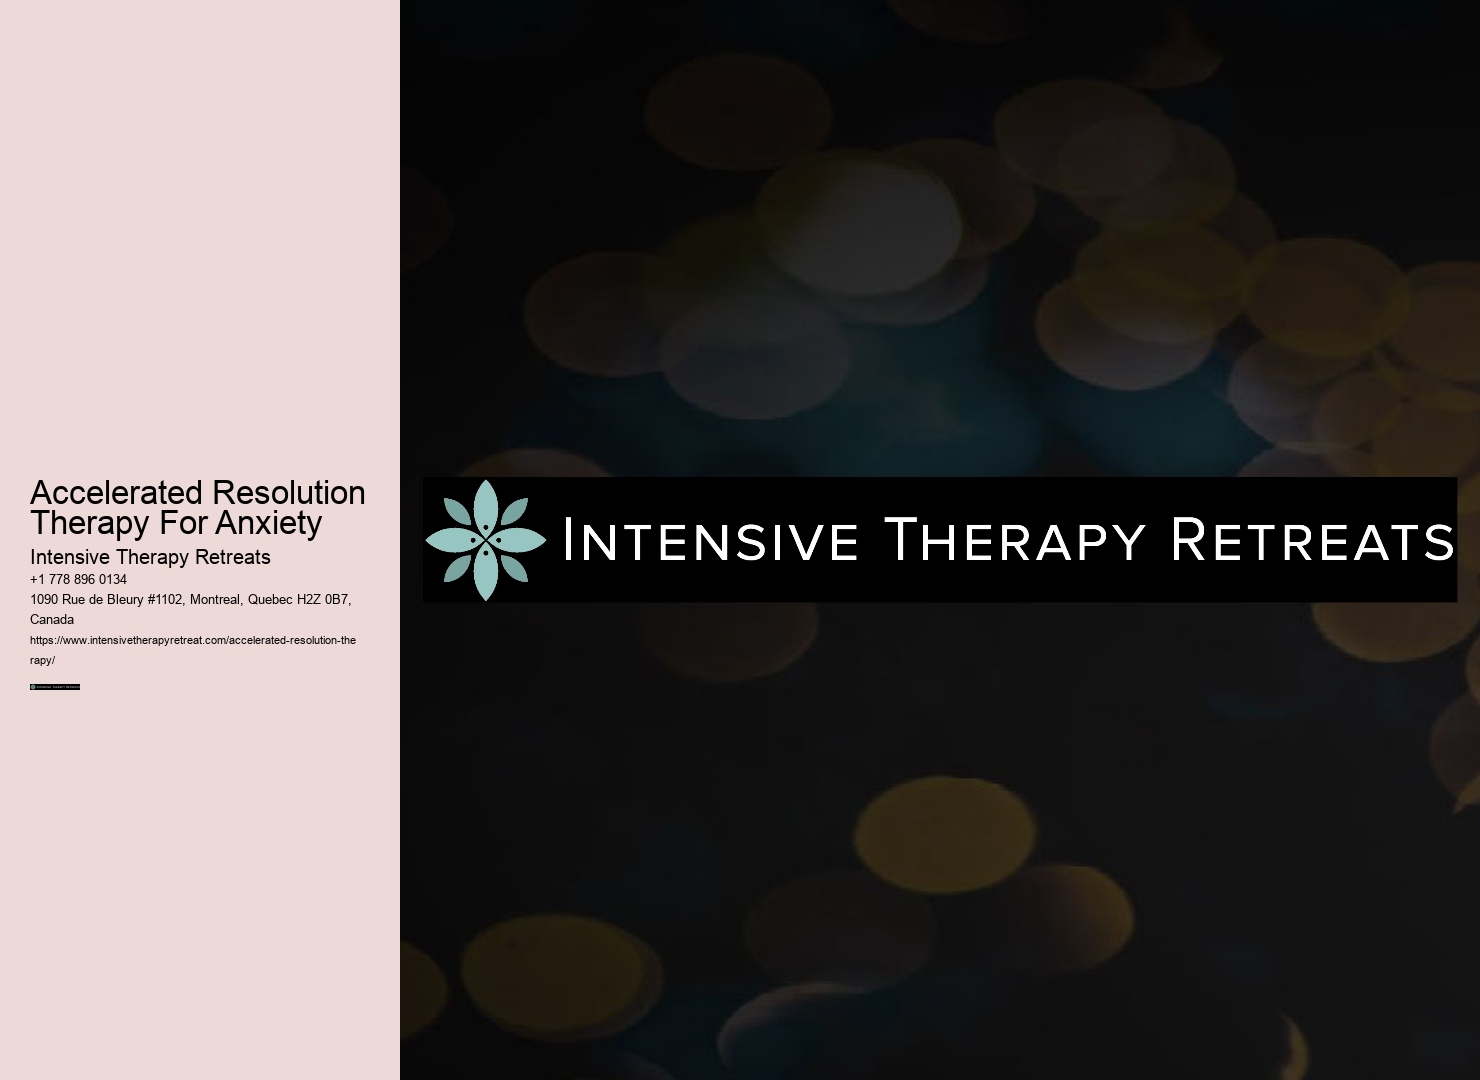 Accelerated Resolution Therapy For Anxiety